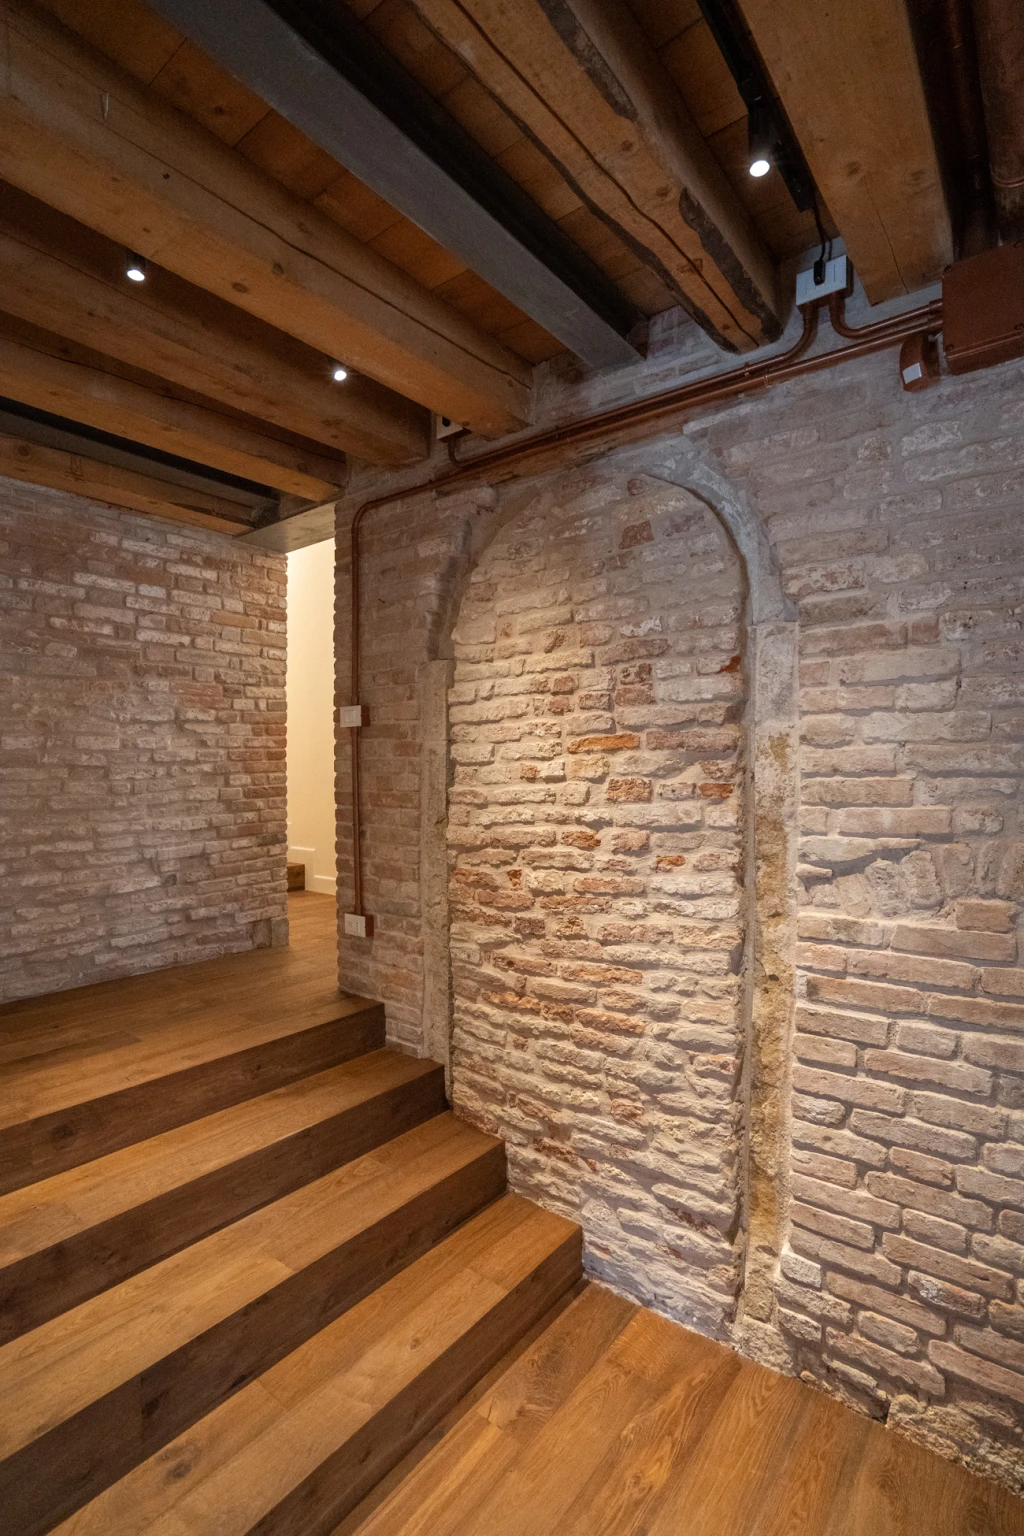 The renovation is a beautiful balance between old and new